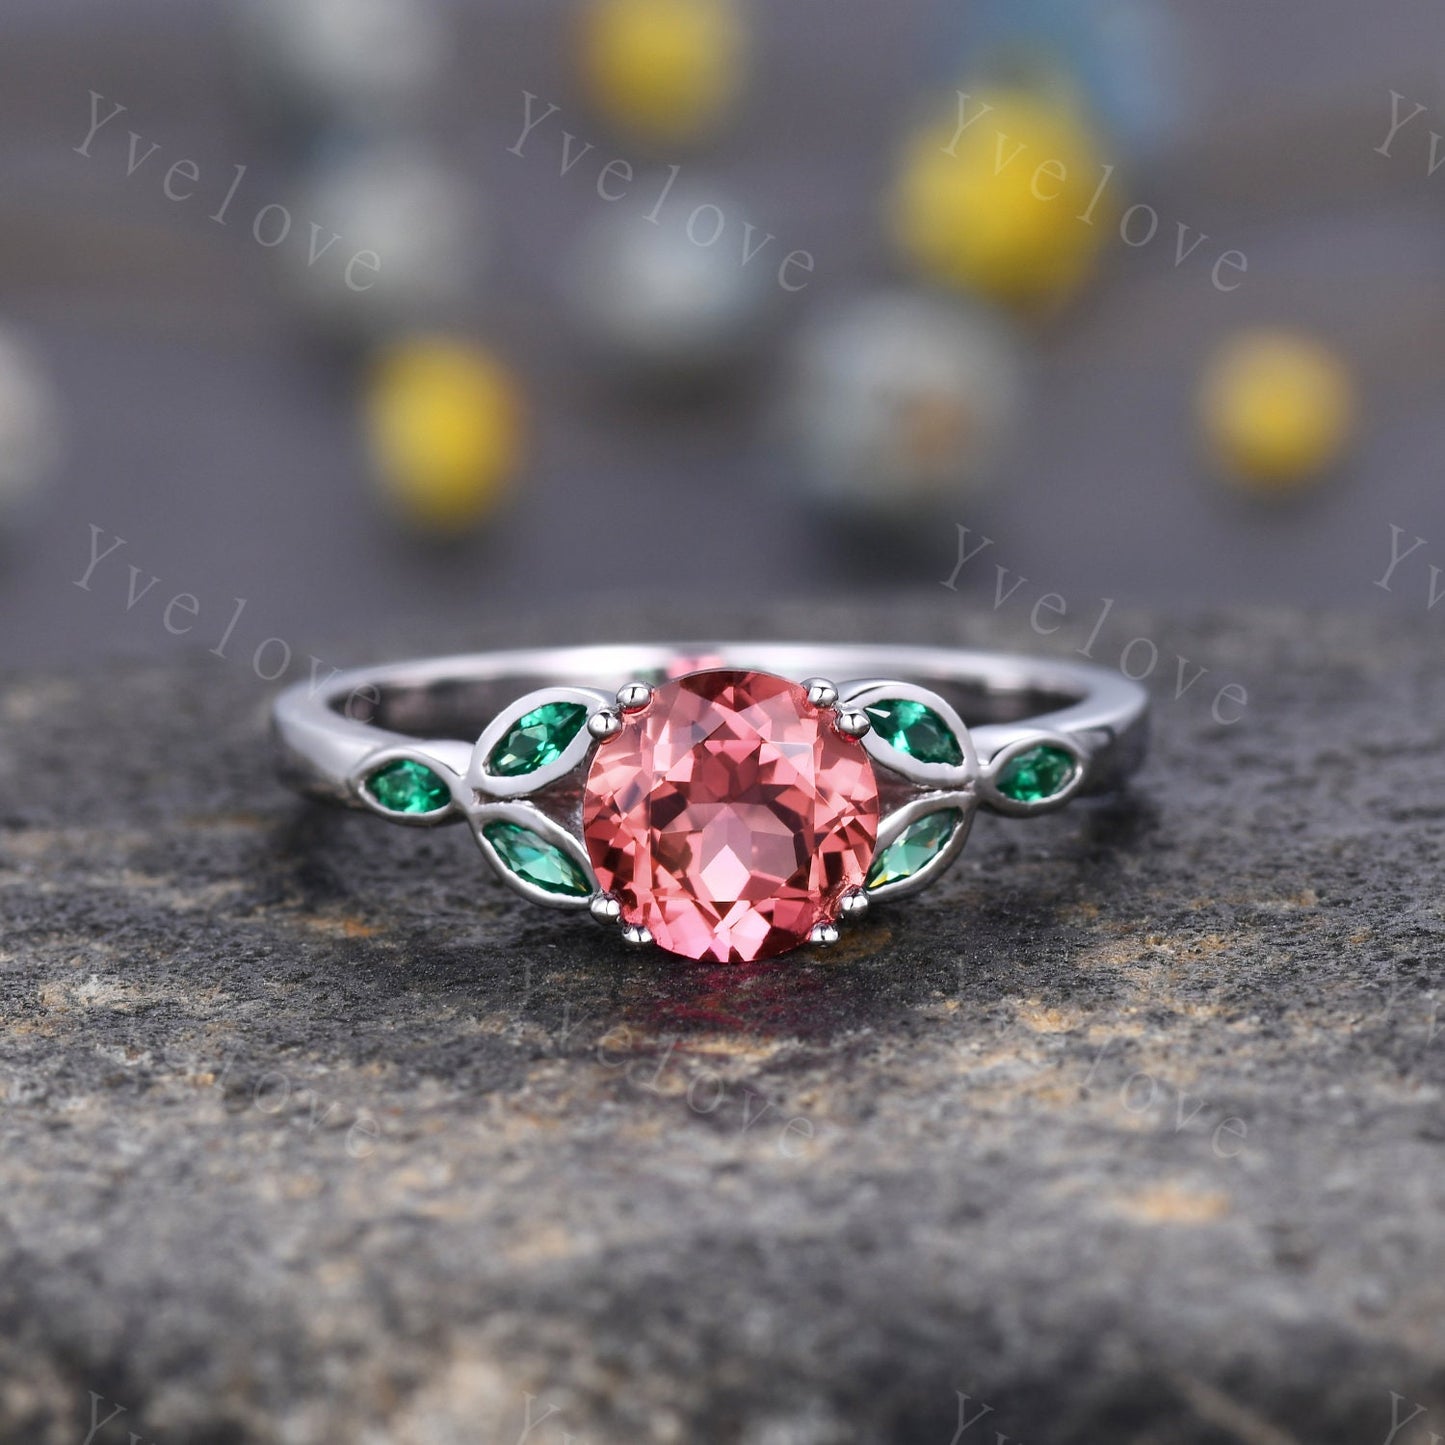 7mm round shaped Padparadscha sapphire engagement ring,Unique sapphire emerald ring,Marquise emerald,gold ring,Promise ring,Anniversary gift